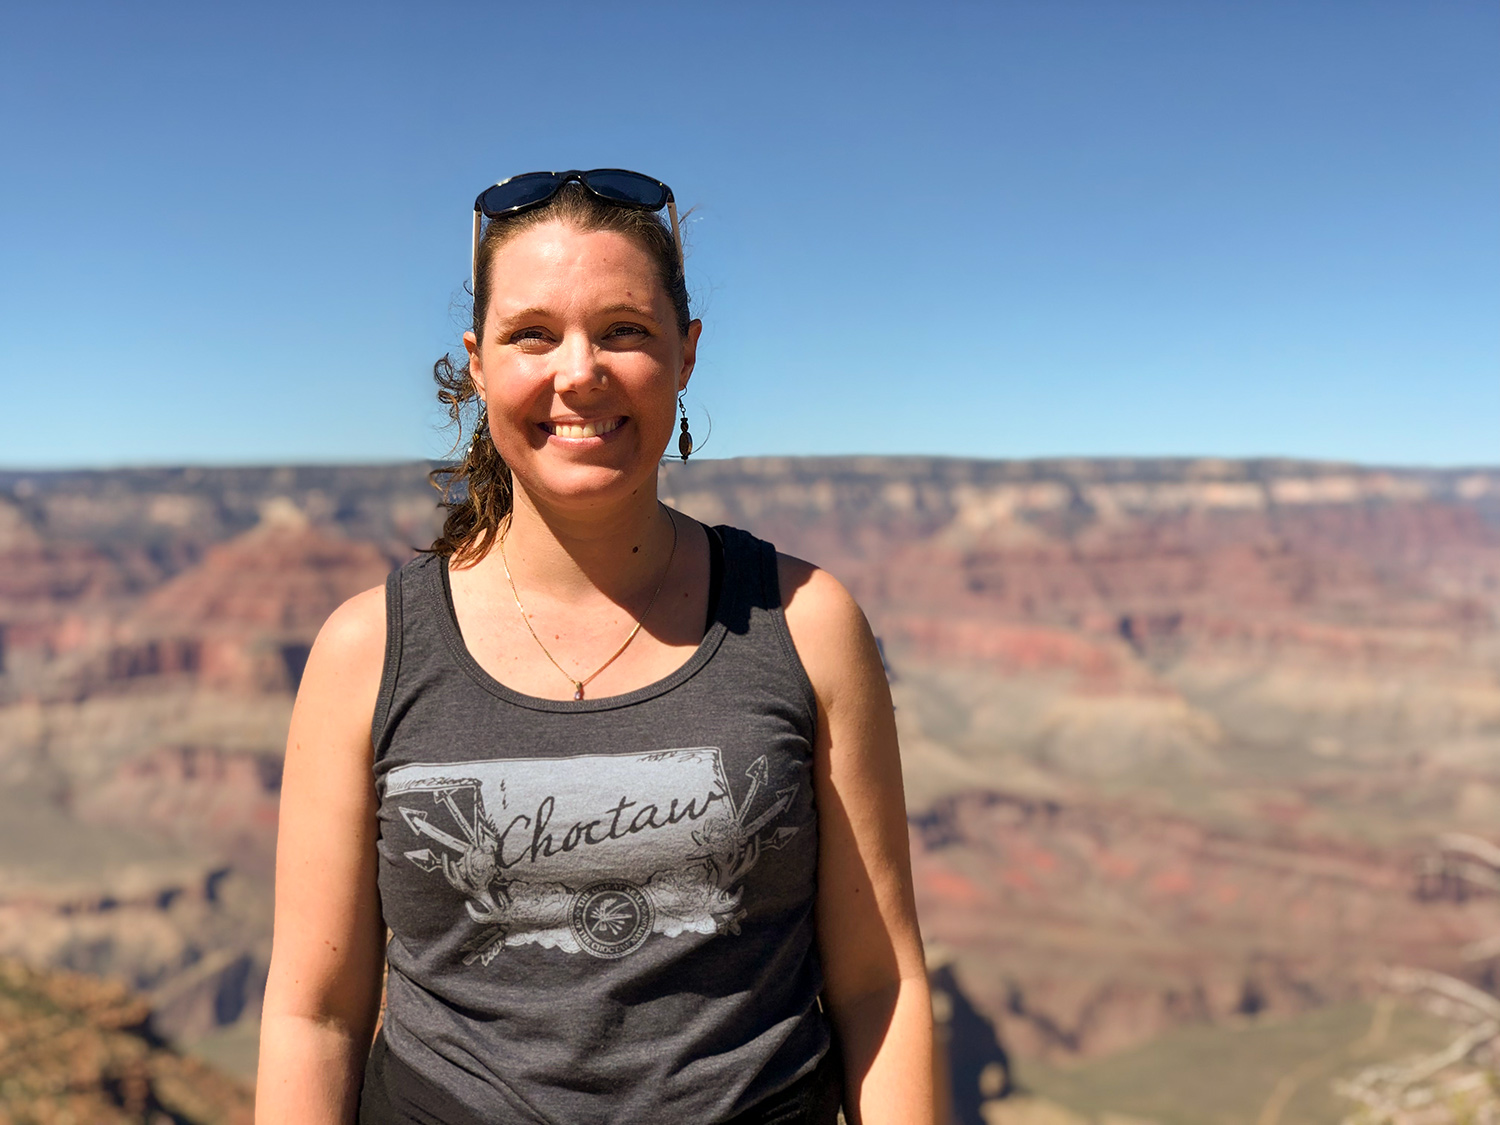 Tara Astigarraga stands in front of the red and green cliffs of the Grand Canyon, smiling and facing the camera. She wears sunglasses on the top of her head and a gray and white tank top with an outline of the state of Oklahoma and the words “Choctaw” written in cursive.